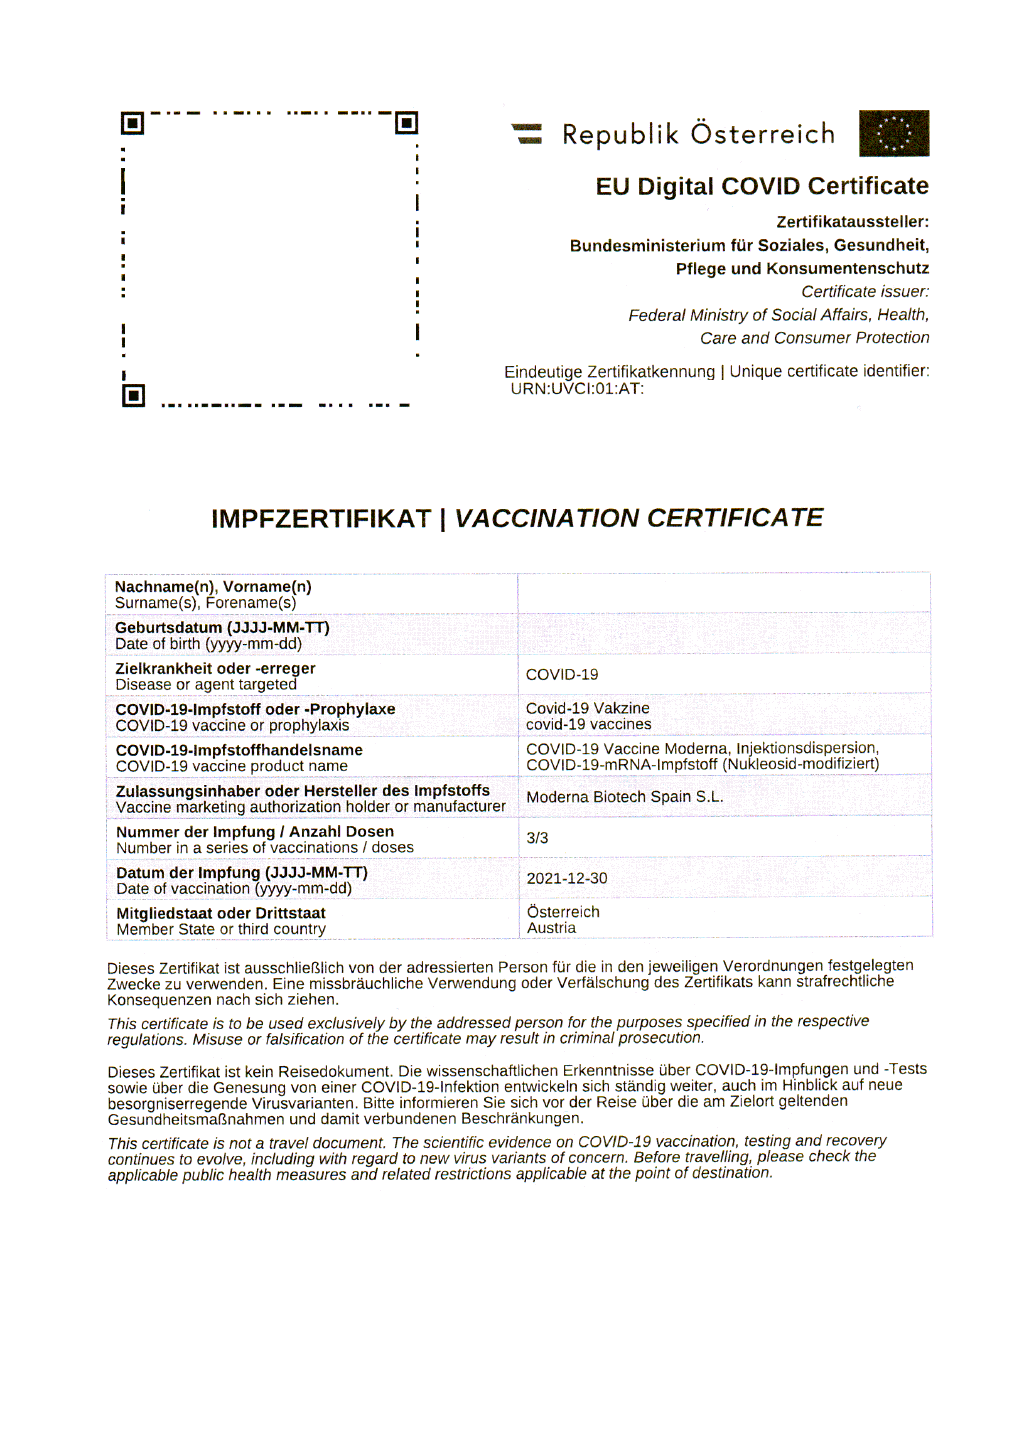 Vaccination certificate document